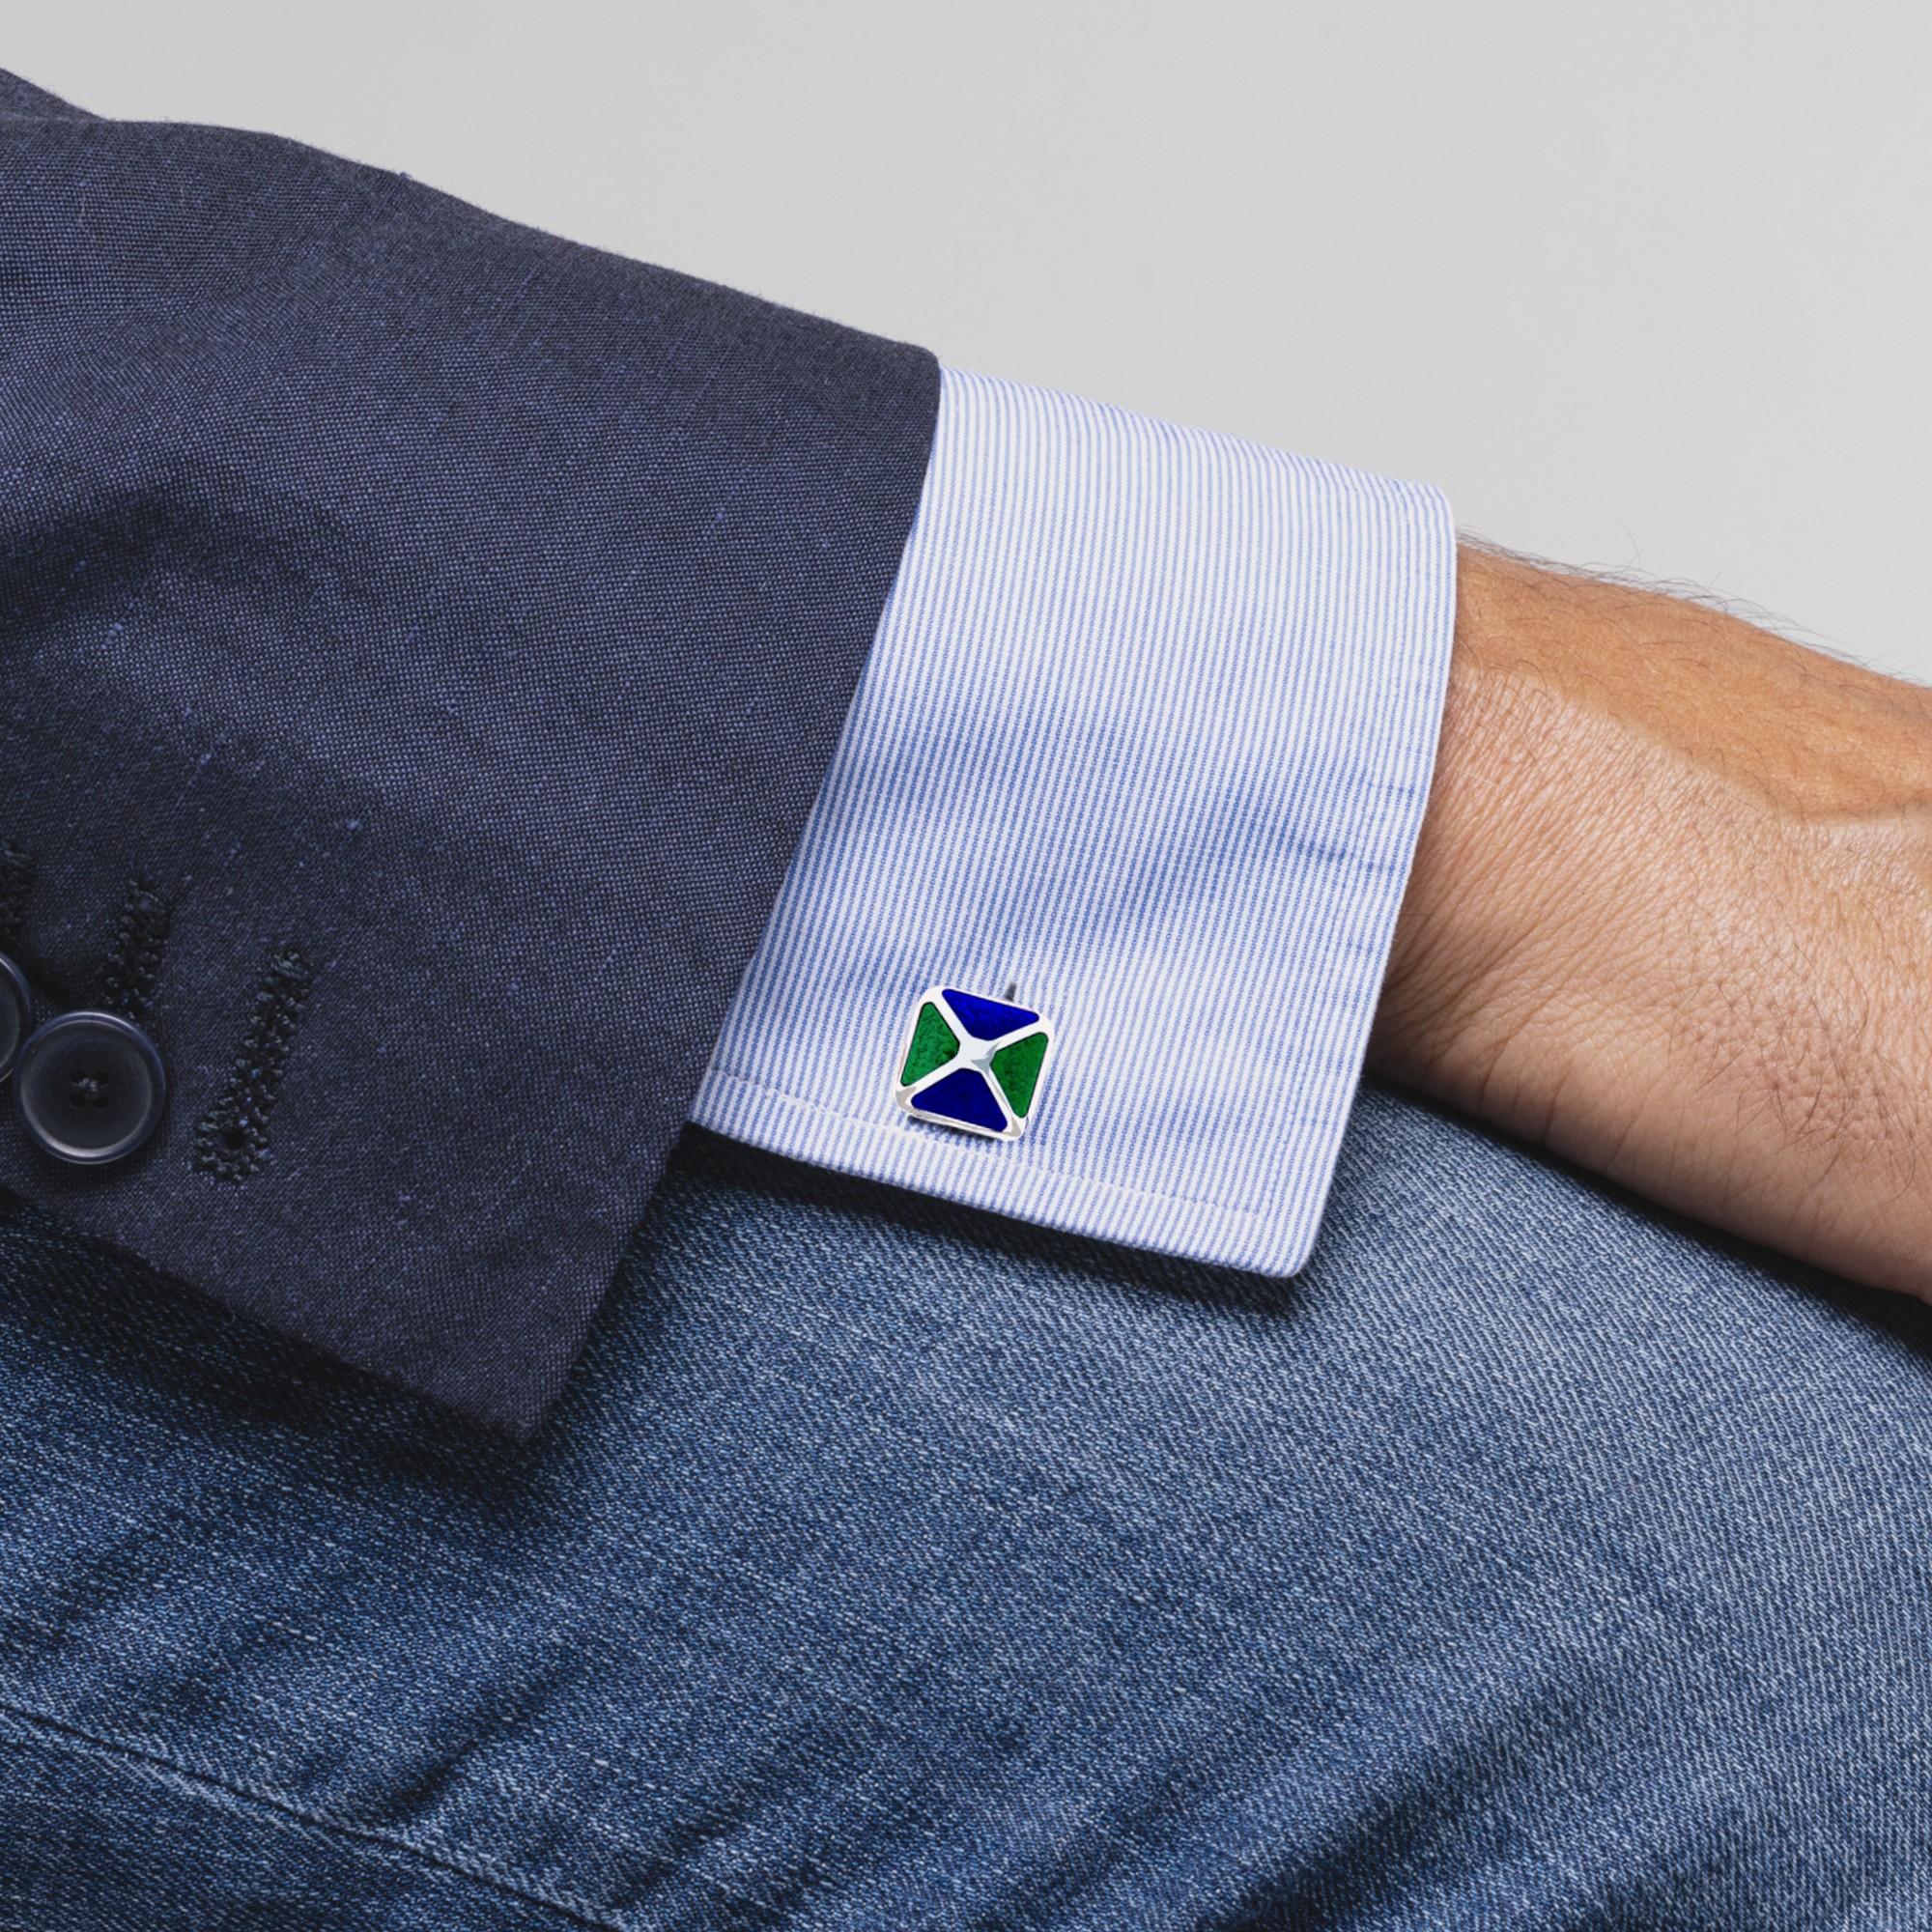 Alex Jona design collection, hand crafted in Italy, rhodium plated Sterling Silver cufflinks with blue and green enamel. These cufflinks feature a T-Bar fastening, aiding in easy use and confidence that they'll stay secured to your shirt.